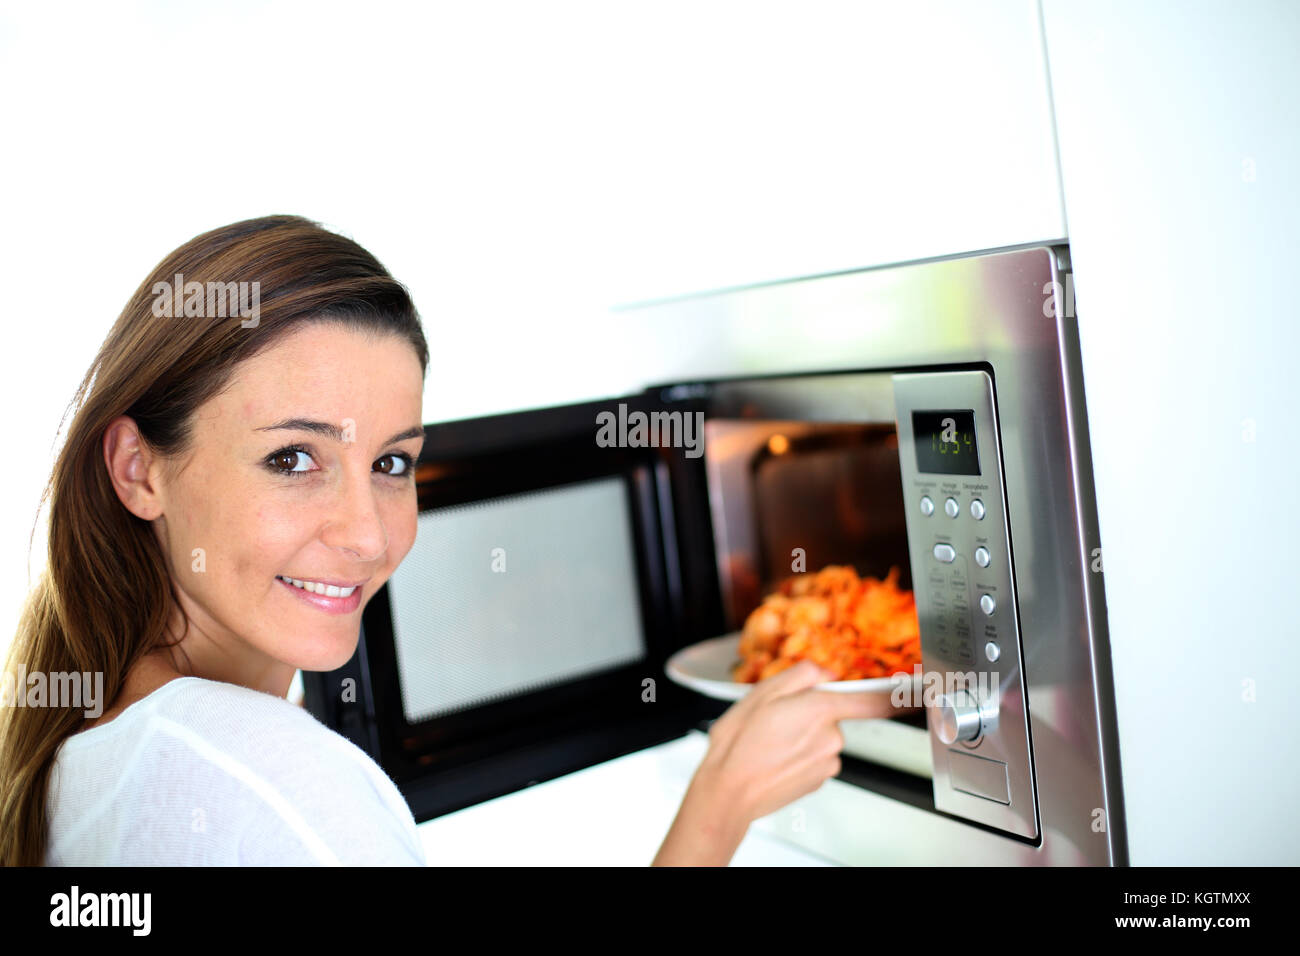 Woman putting plate in microwave oven Stock Photo